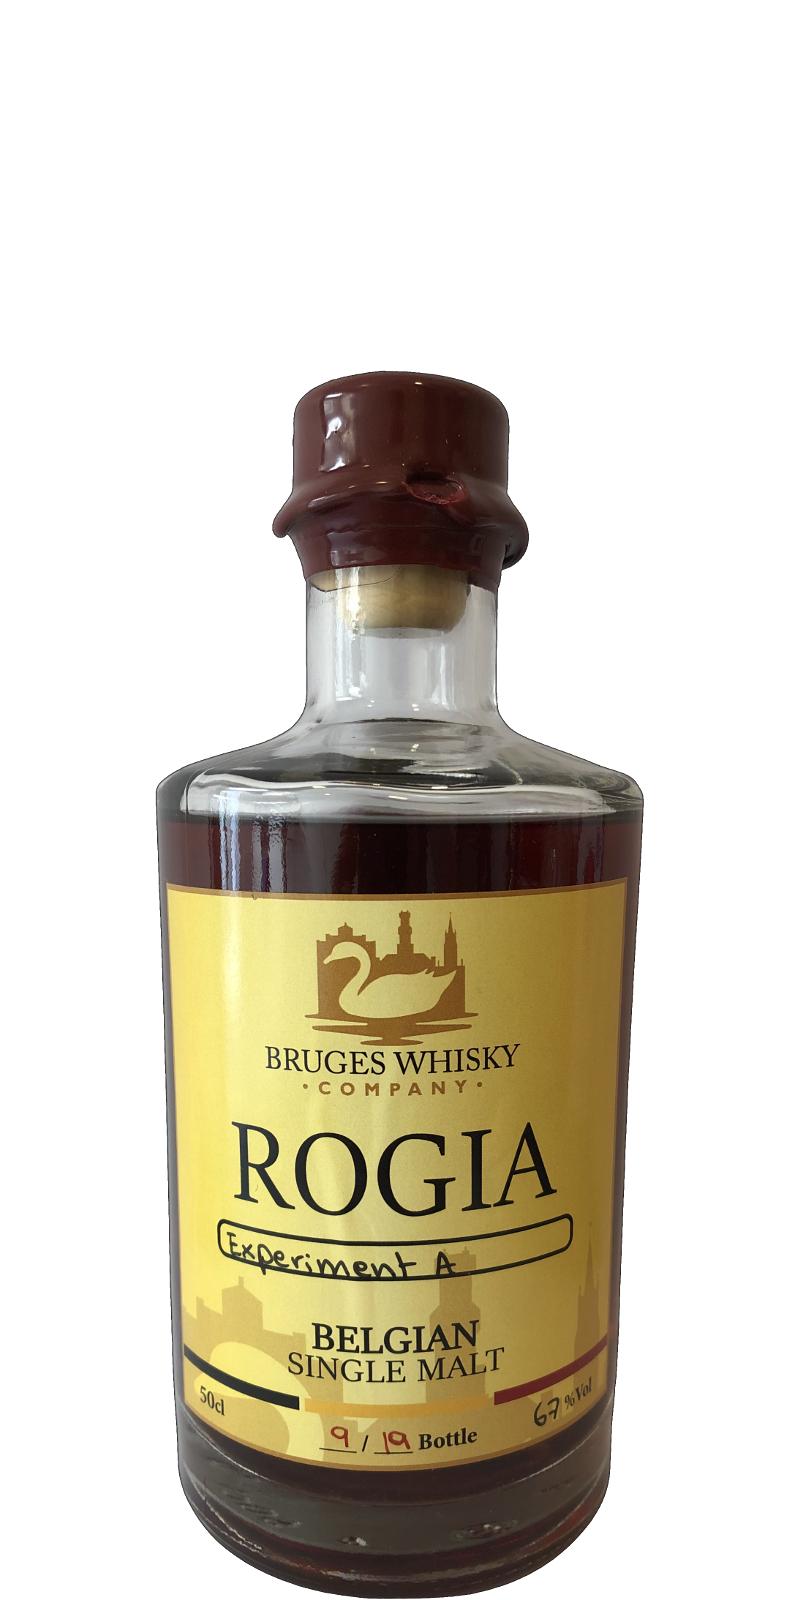 Bruges Whisky Company Rogia Experiment A 67% 500ml